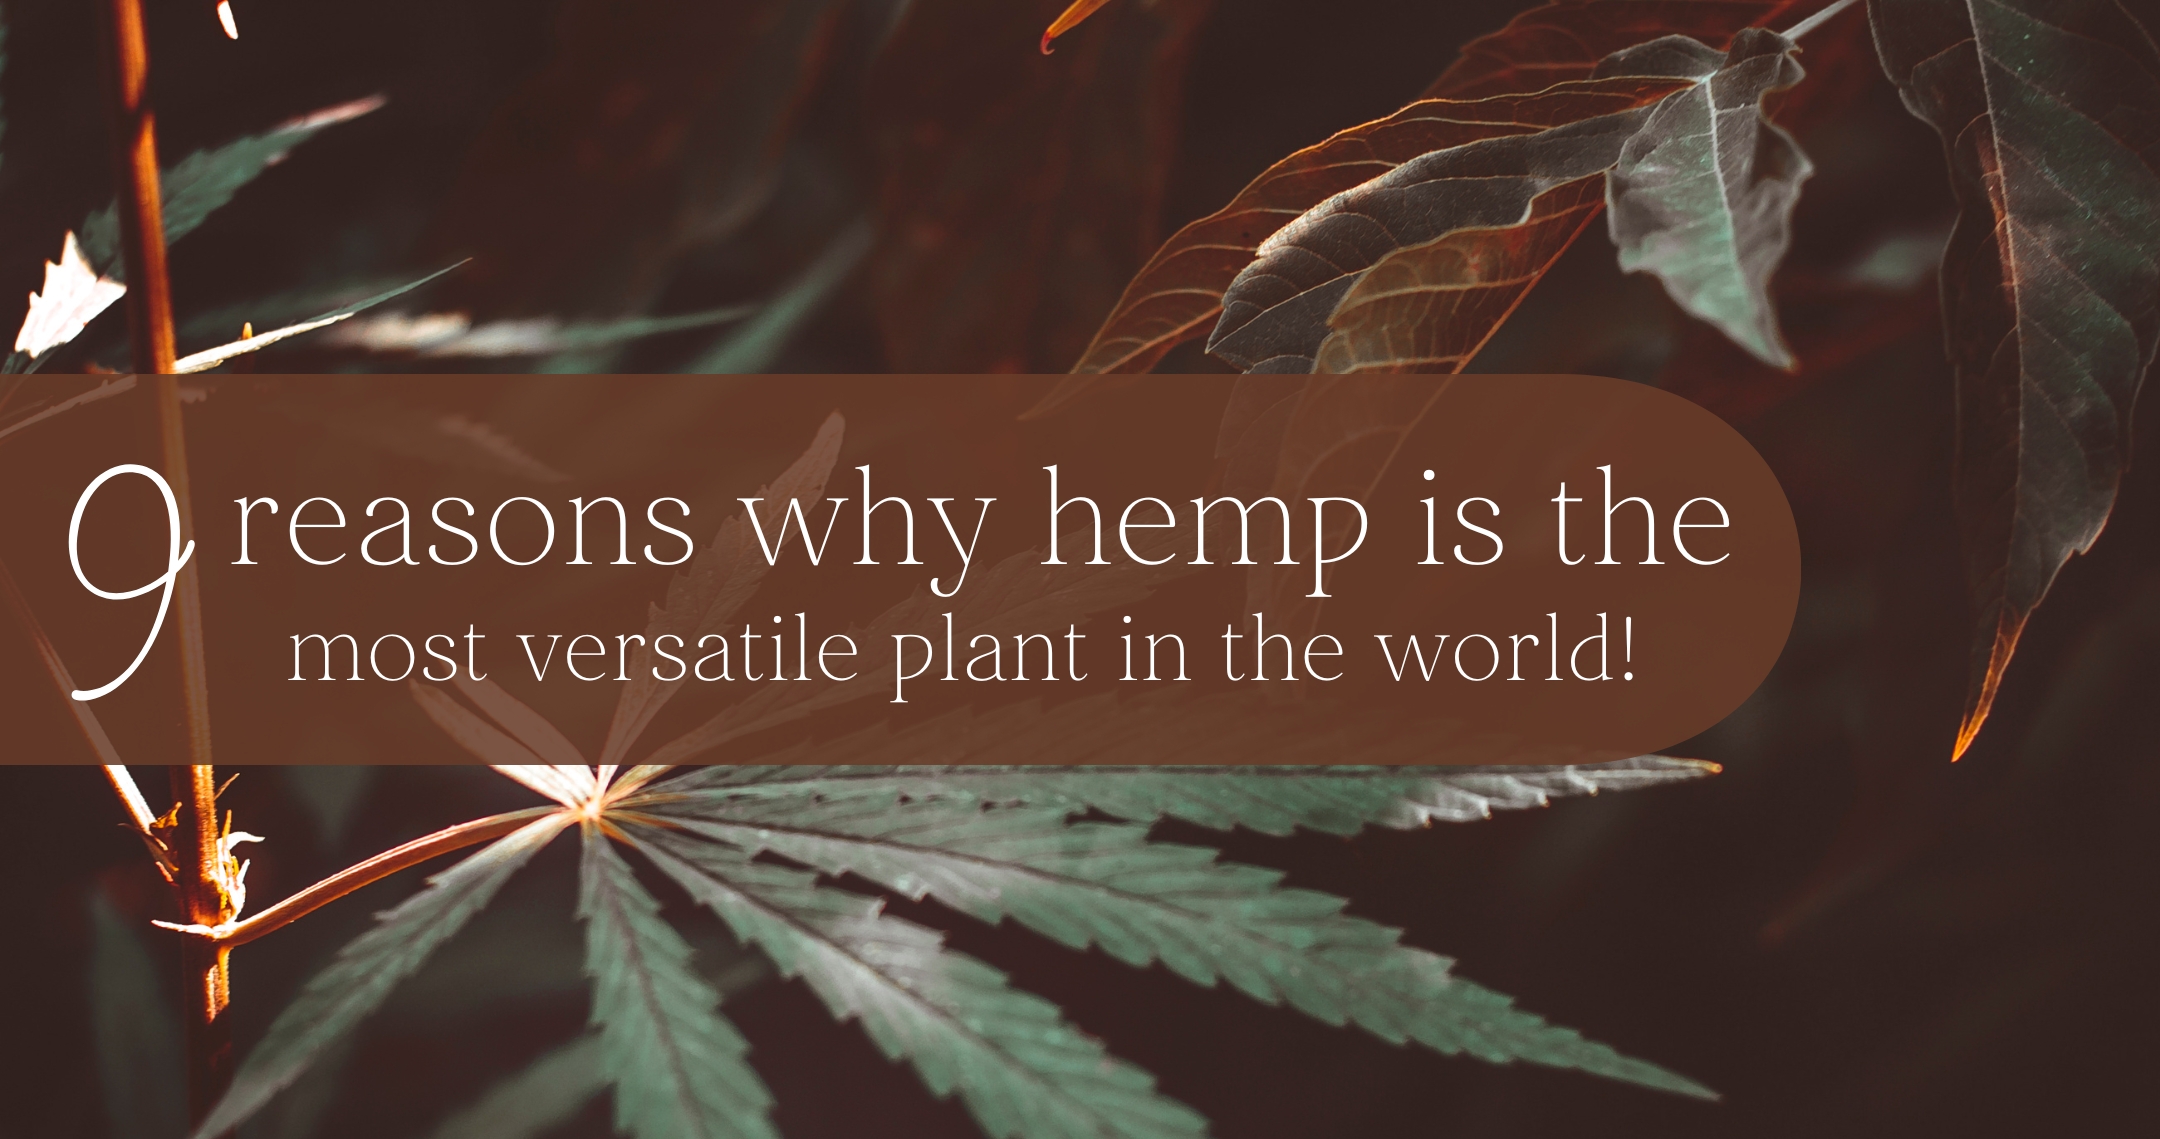 9 Reasons Why Hemp is the Most Versatile Plant on Earth!